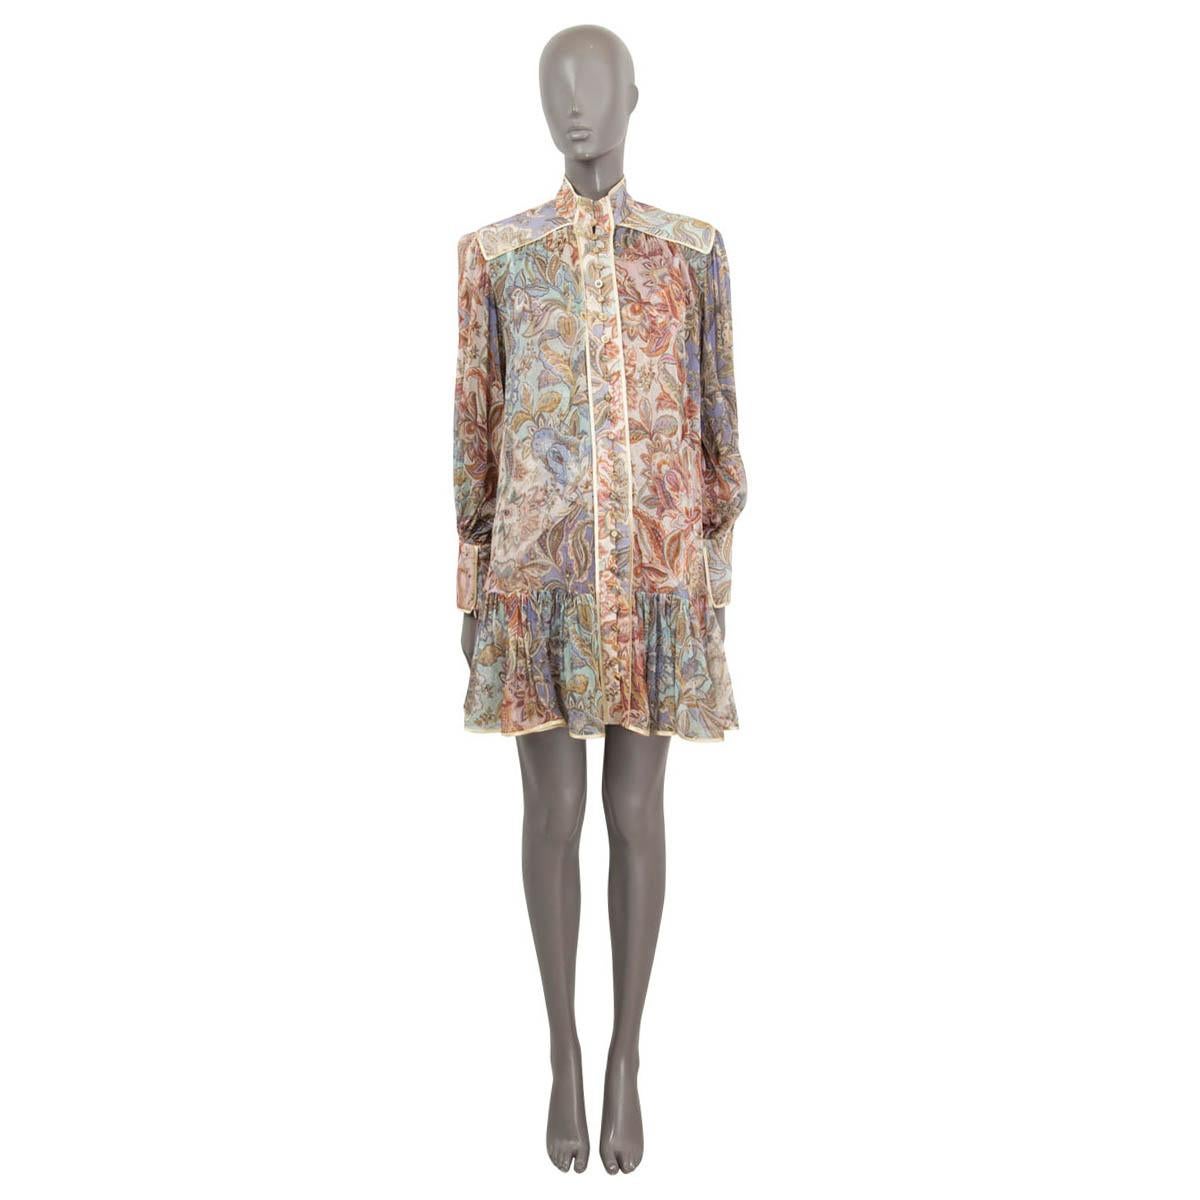 100% authentic Zimmermann Lucky Bound floral-paisley mini dress in multicolor silk (100%). Features long sleeves with zipper to the cuffs. Opens with buttons on the front. Comes with a matching slip dress in polyester (90%) and elastane (10%). Tag